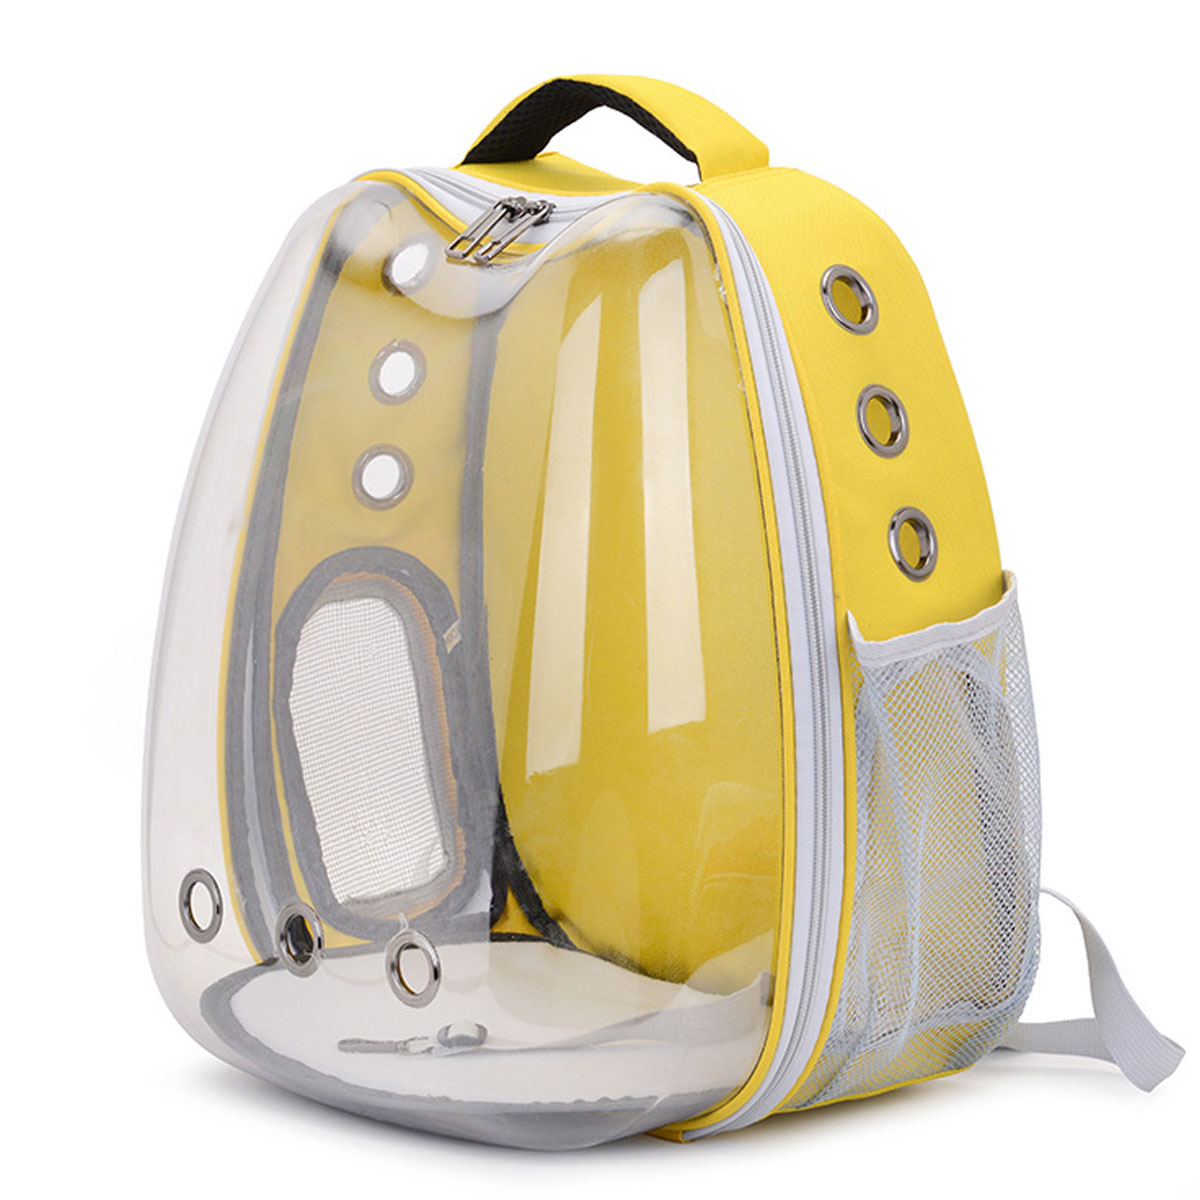 Multi-function-Pet-Carrier-Backpack-Waterproof-Oxford-Cloth-for-Cat-Dog-Puppy-Supplies-Travel-Portab-1939112-2